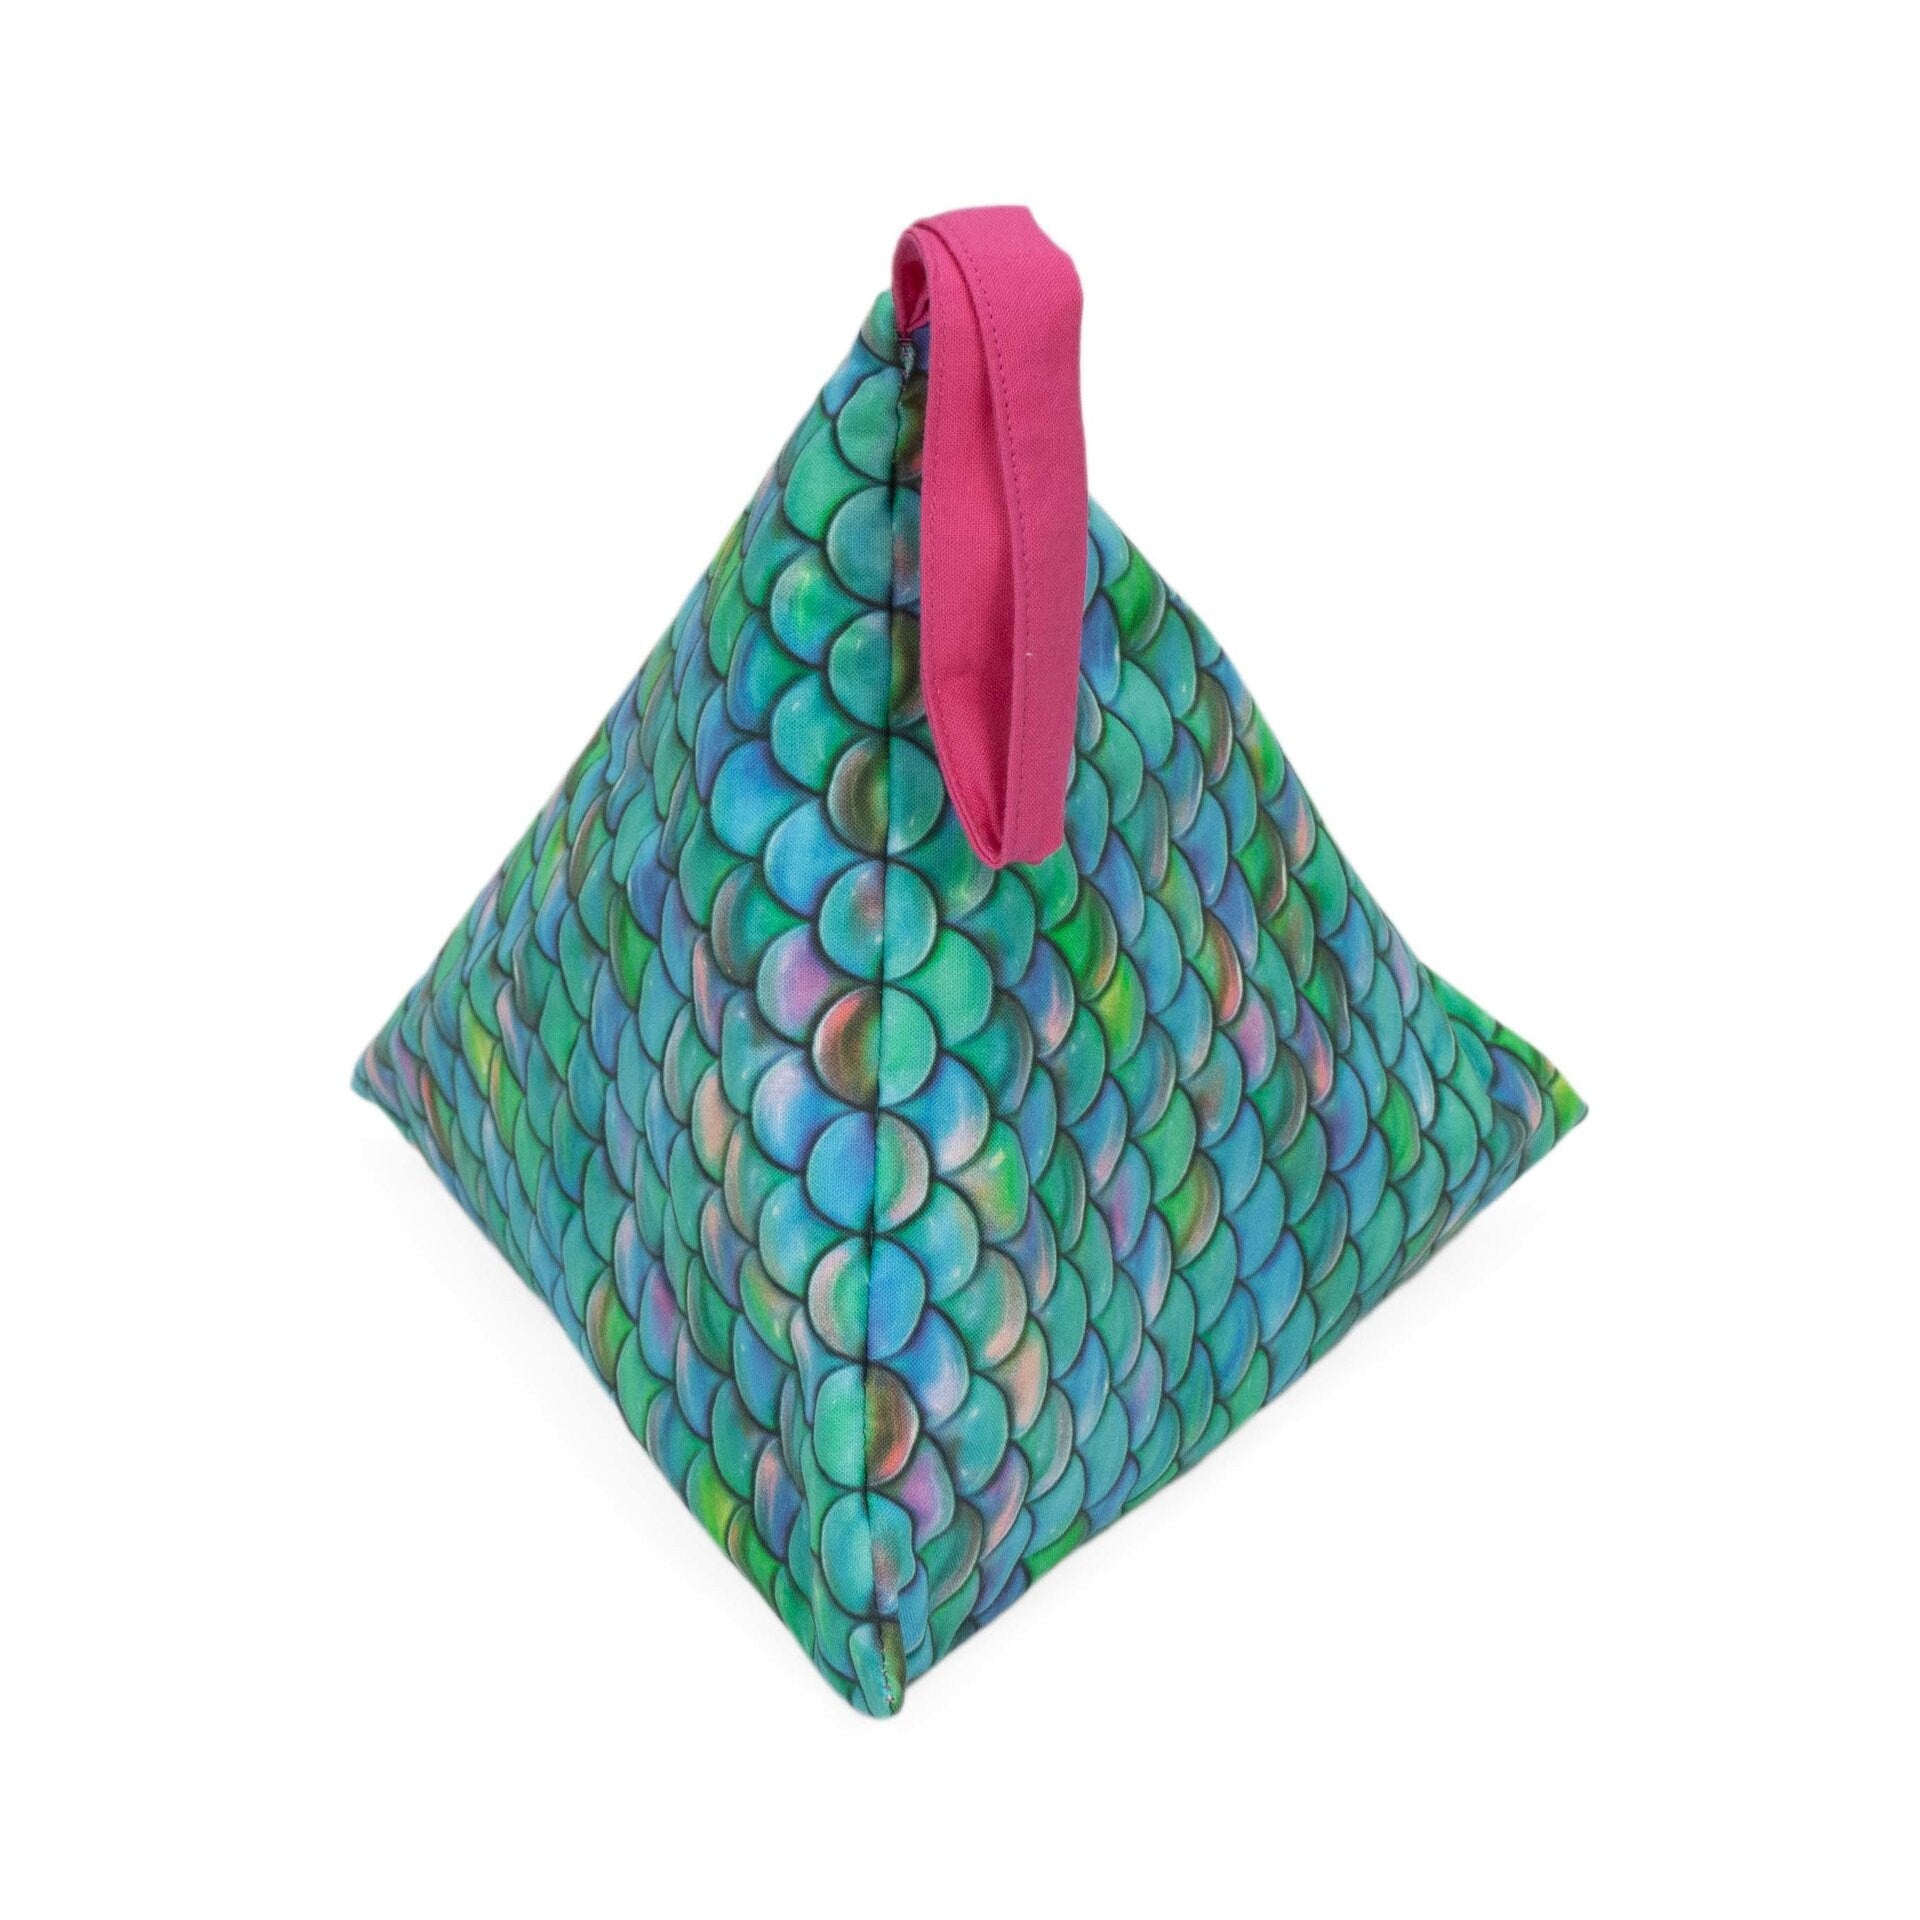 Mermaid Scales - Llexical Divided Sock Pouch - Knitting, Crochet, Spinning Project Bag